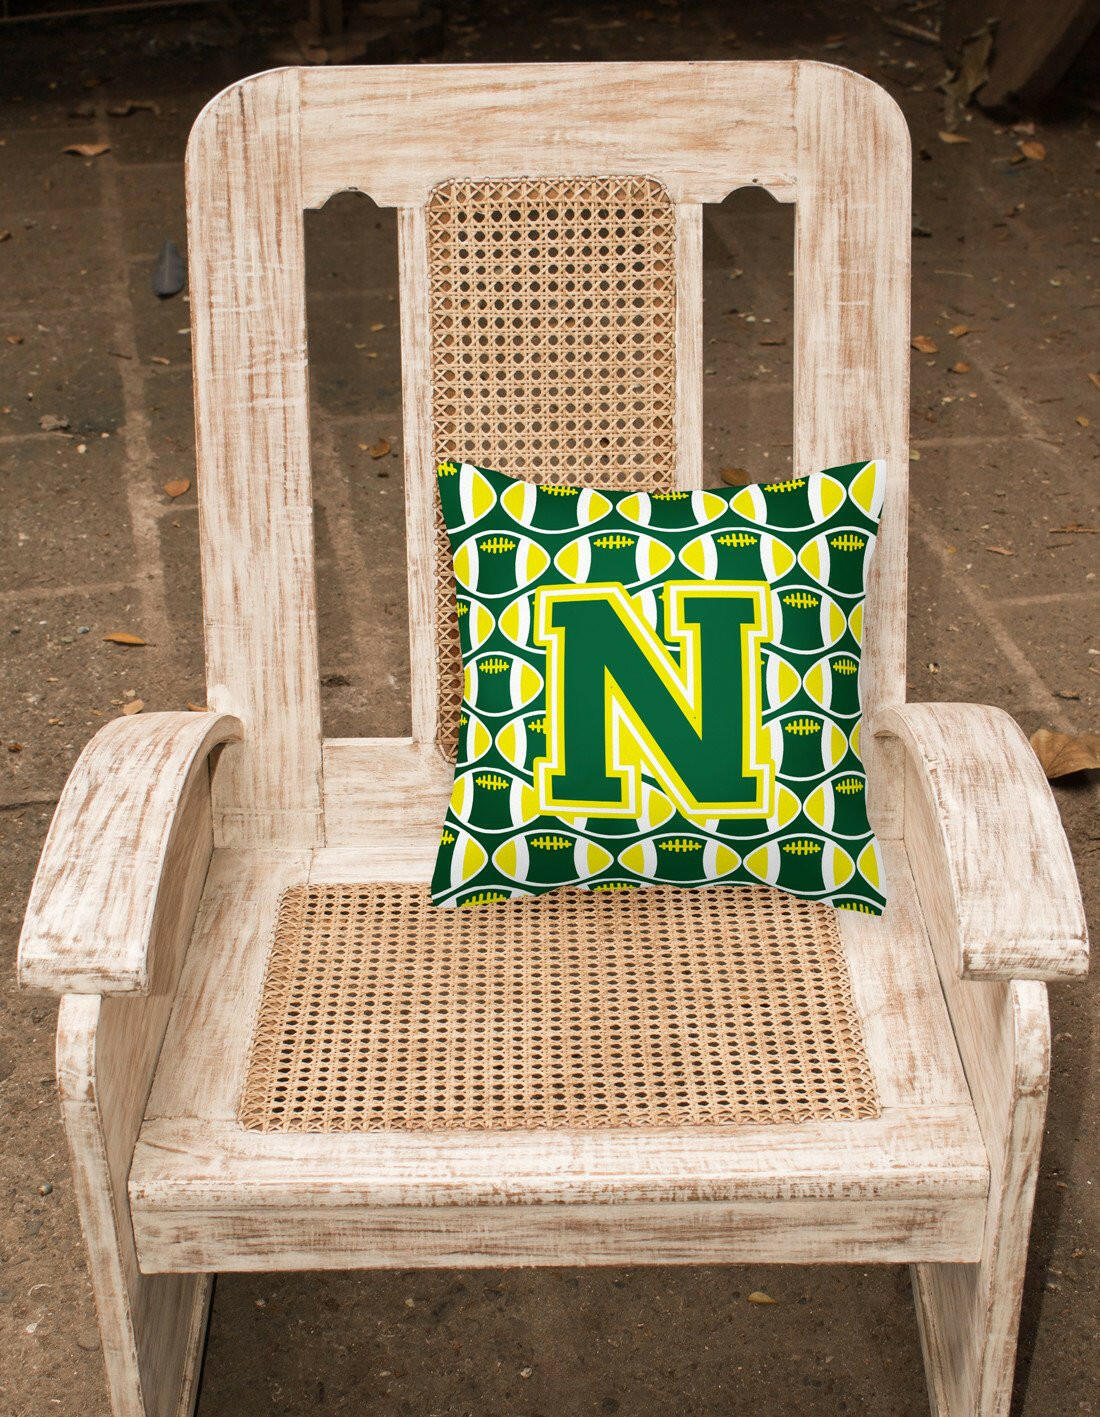 Letter N Football Green and Yellow Fabric Decorative Pillow CJ1075-NPW1414 by Caroline's Treasures